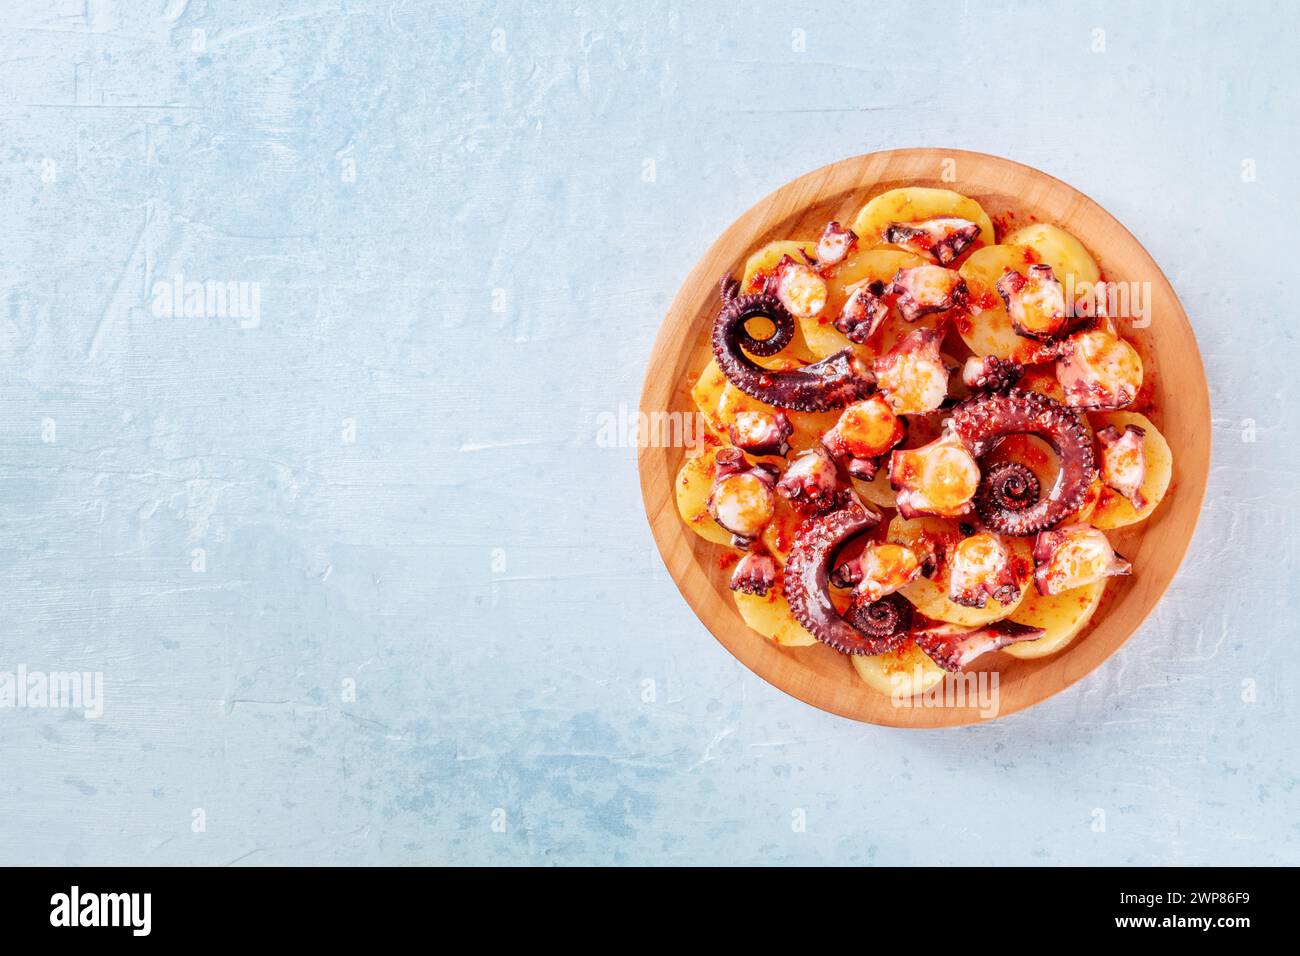 Pulpo a la gallega, Spanish octopus and potato dinner, Galician dish, shot from the top with copy space Stock Photo